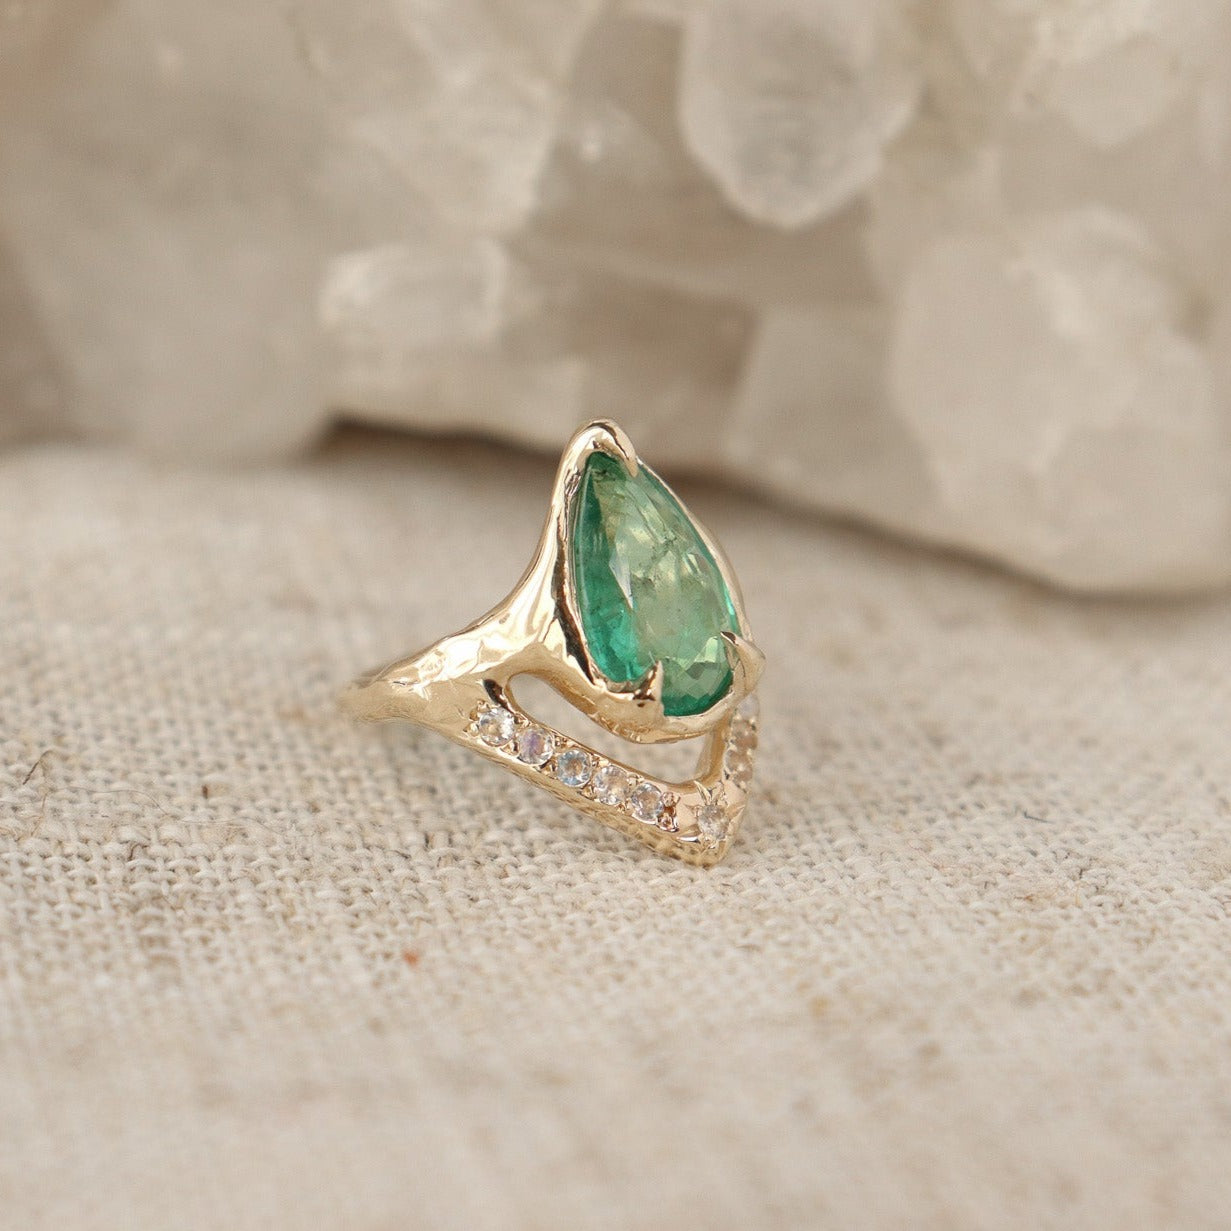 Side view of a pear shaped emerald is set with prongs and has a V-shape band under the stone with moonstones.